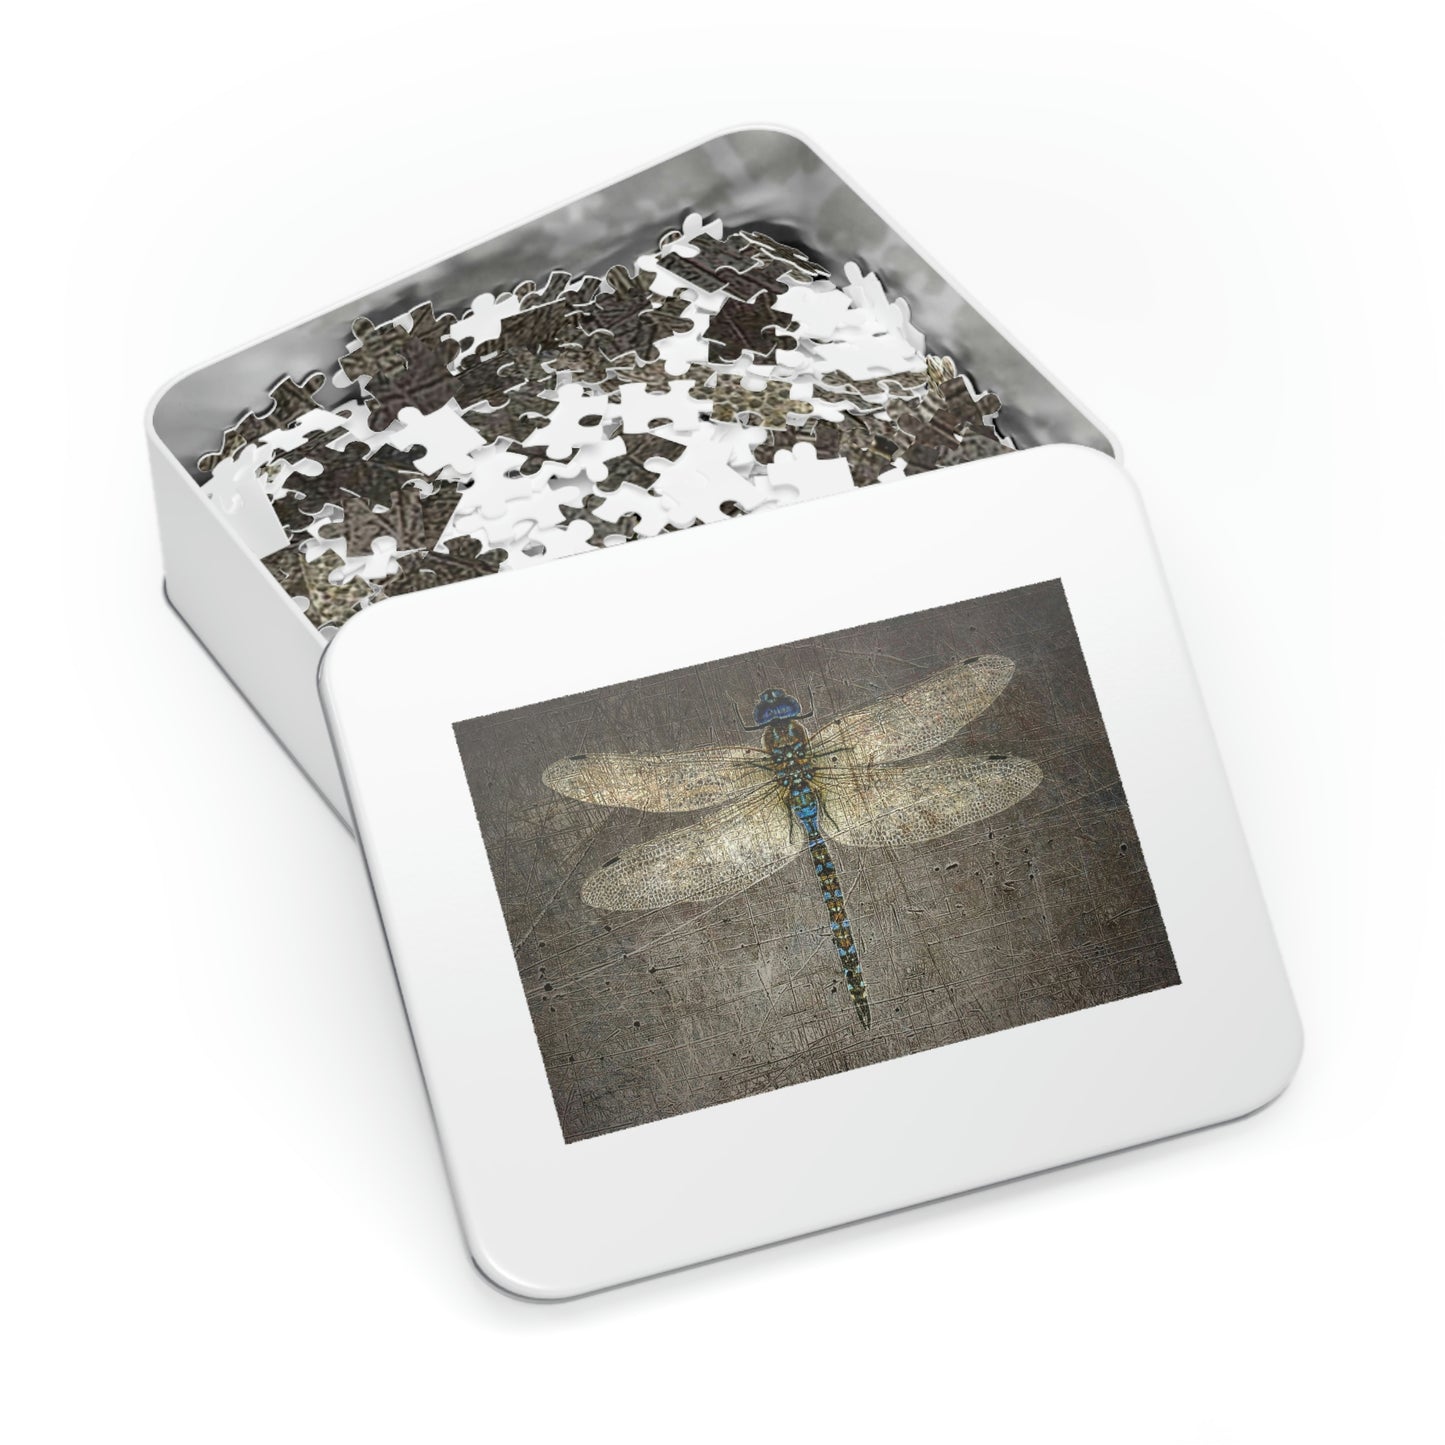 Dragonfly on Distressed Granite Background Puzzle 1000 pieces in tin